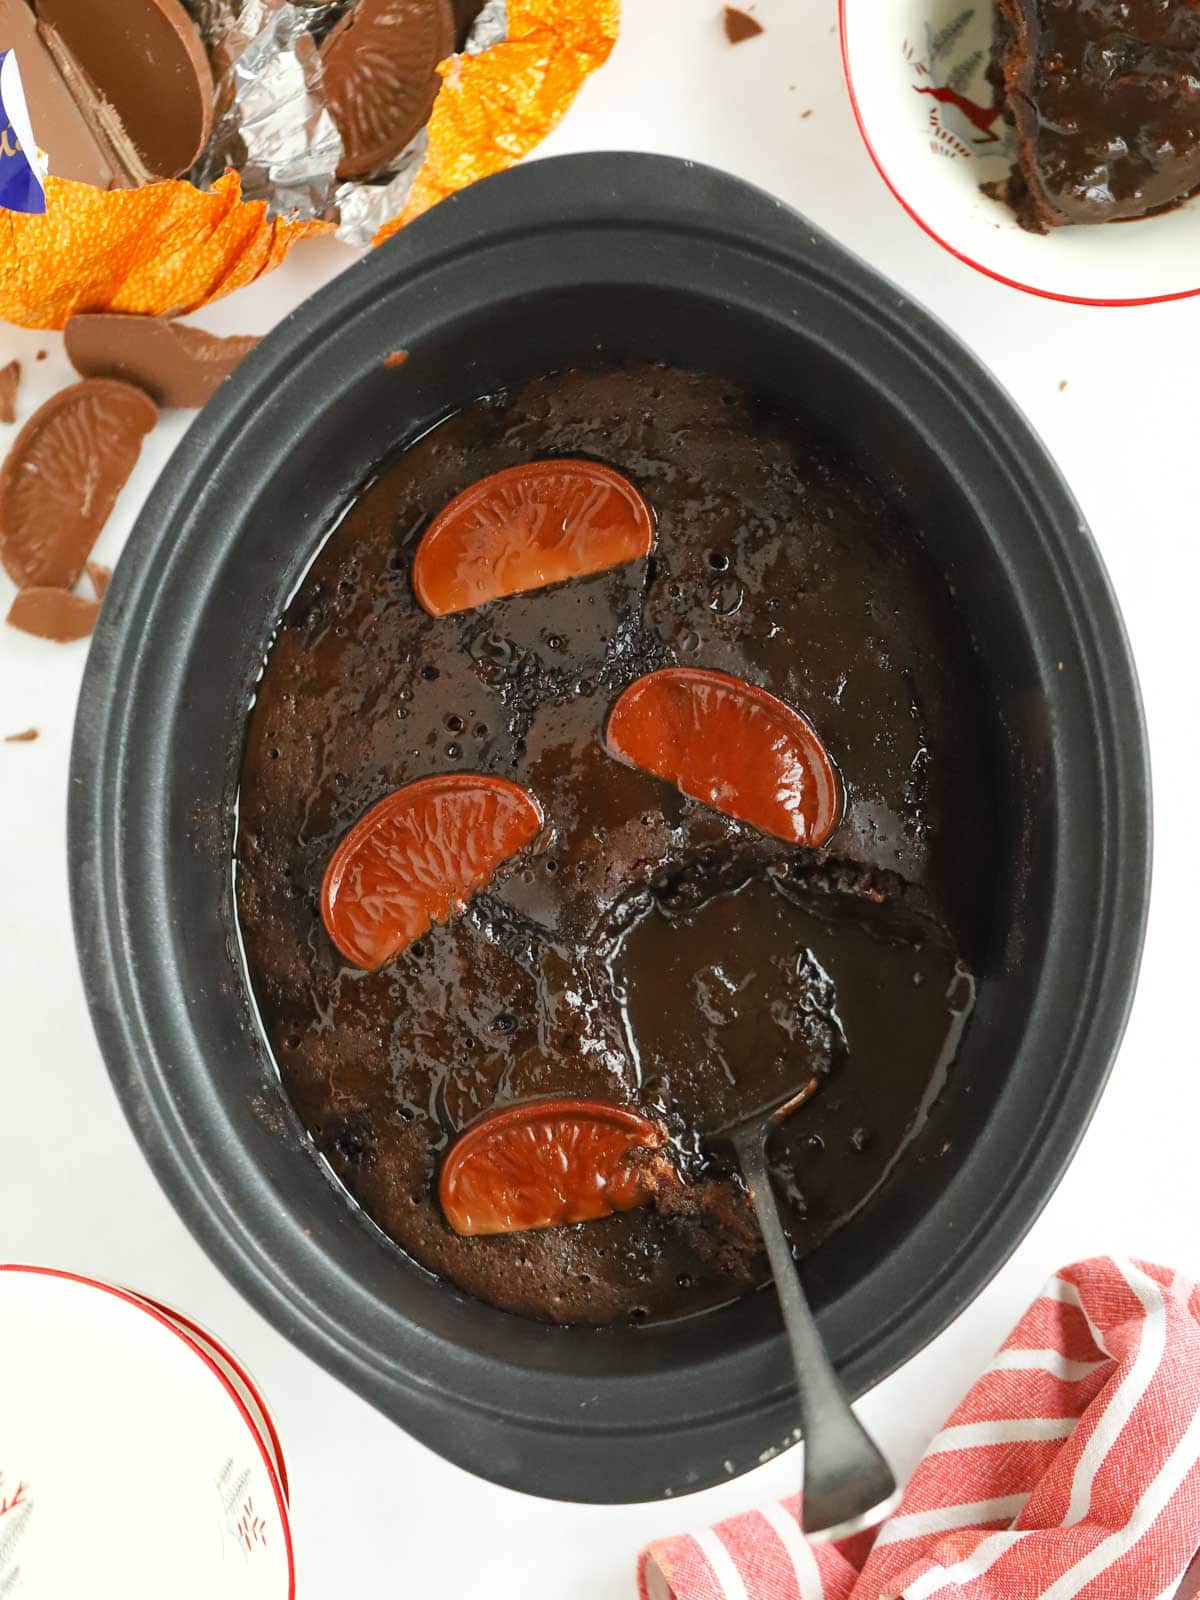 Slow cooker chocolate pudding with chocolate oranges, serving straight out of the pan.